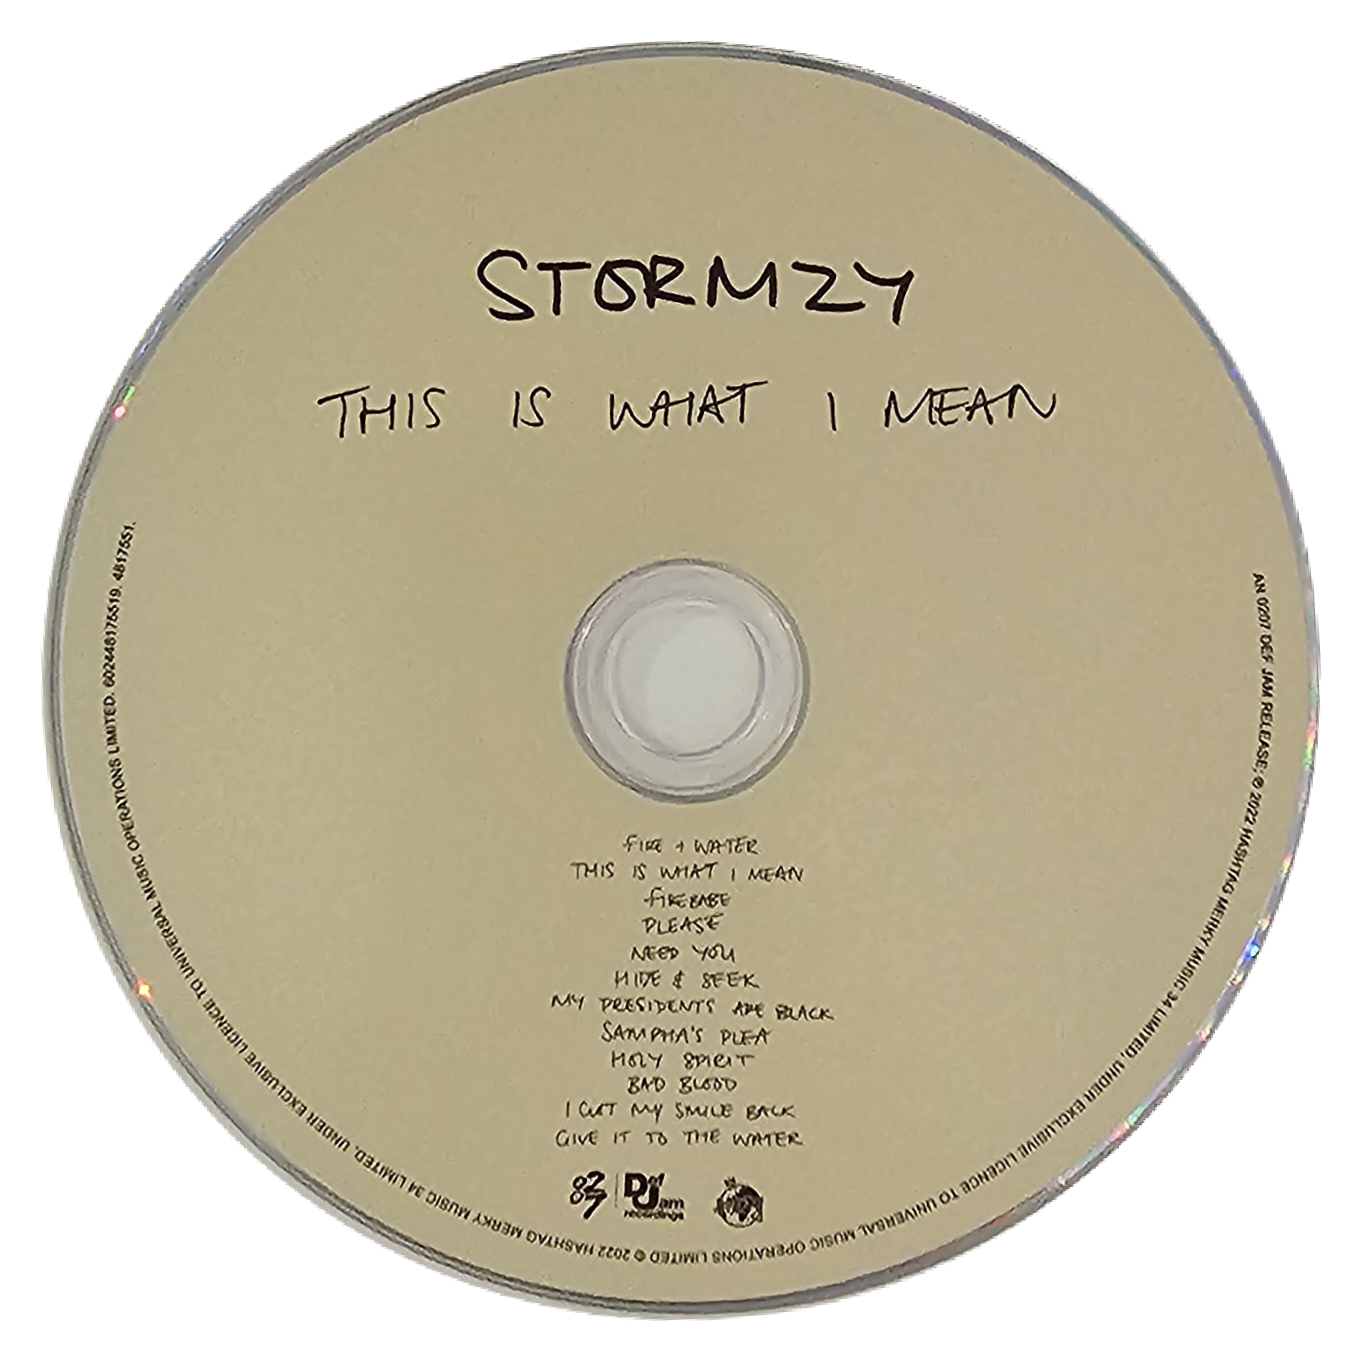 Stormzy (This is What I Mean)